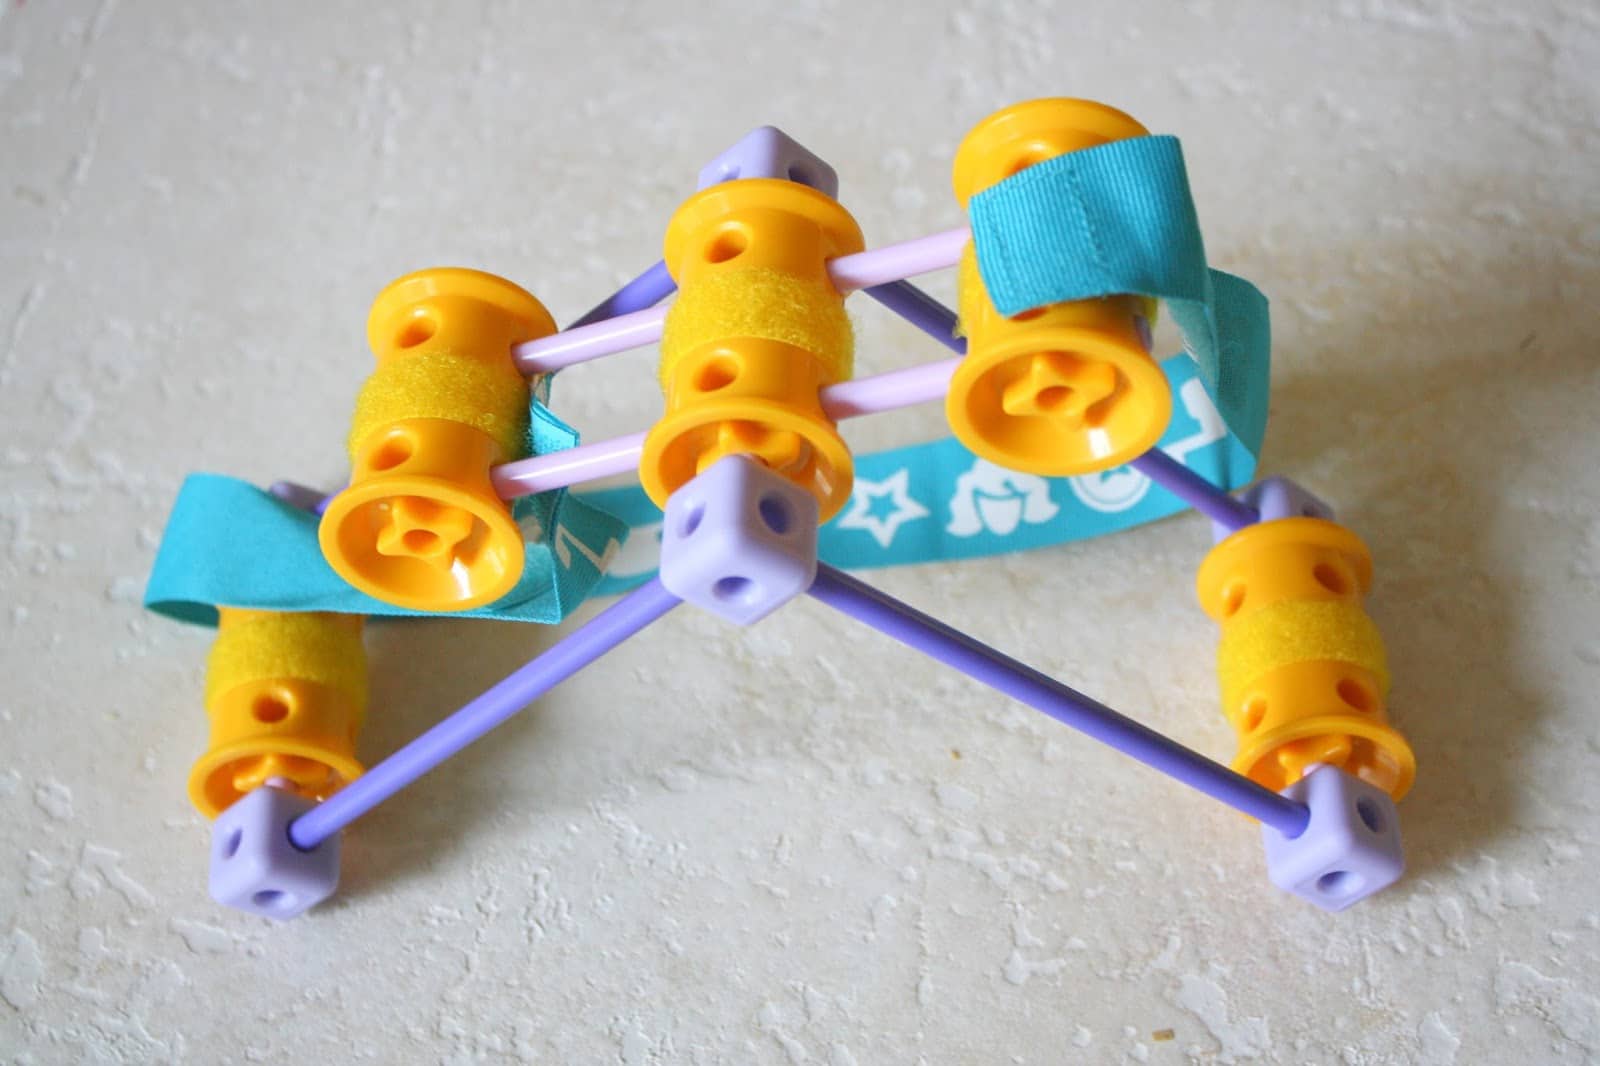 Goldie Blox Invention: A Girls Building Toy